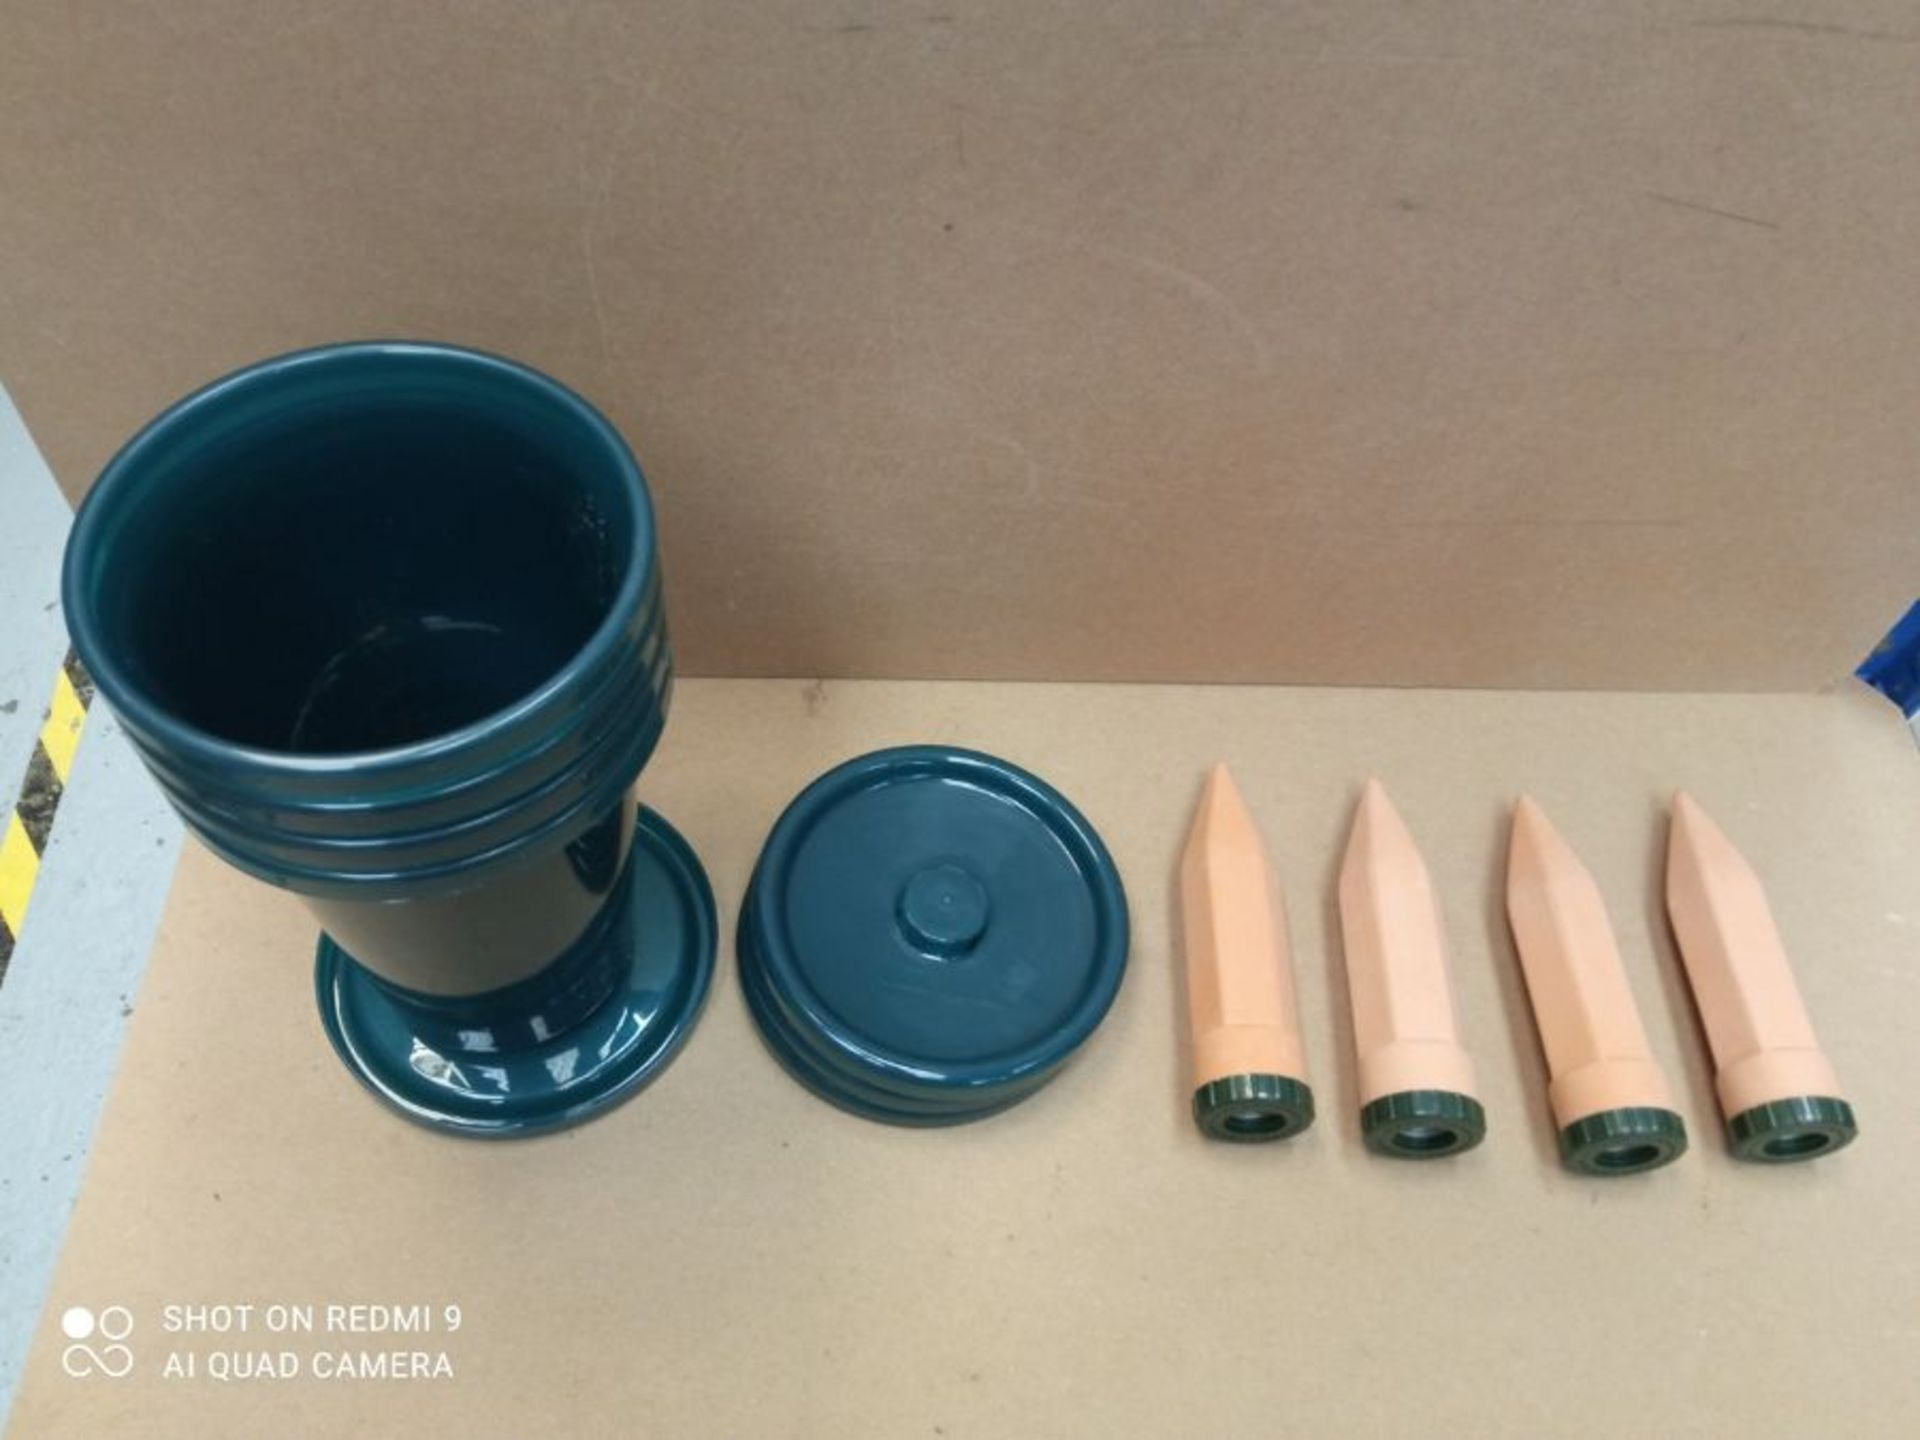 Bio Green, 4er Set Hydro, Set of 4 Clay Cones with Matching Cup Attachments, 2.5 Litre - Image 3 of 3